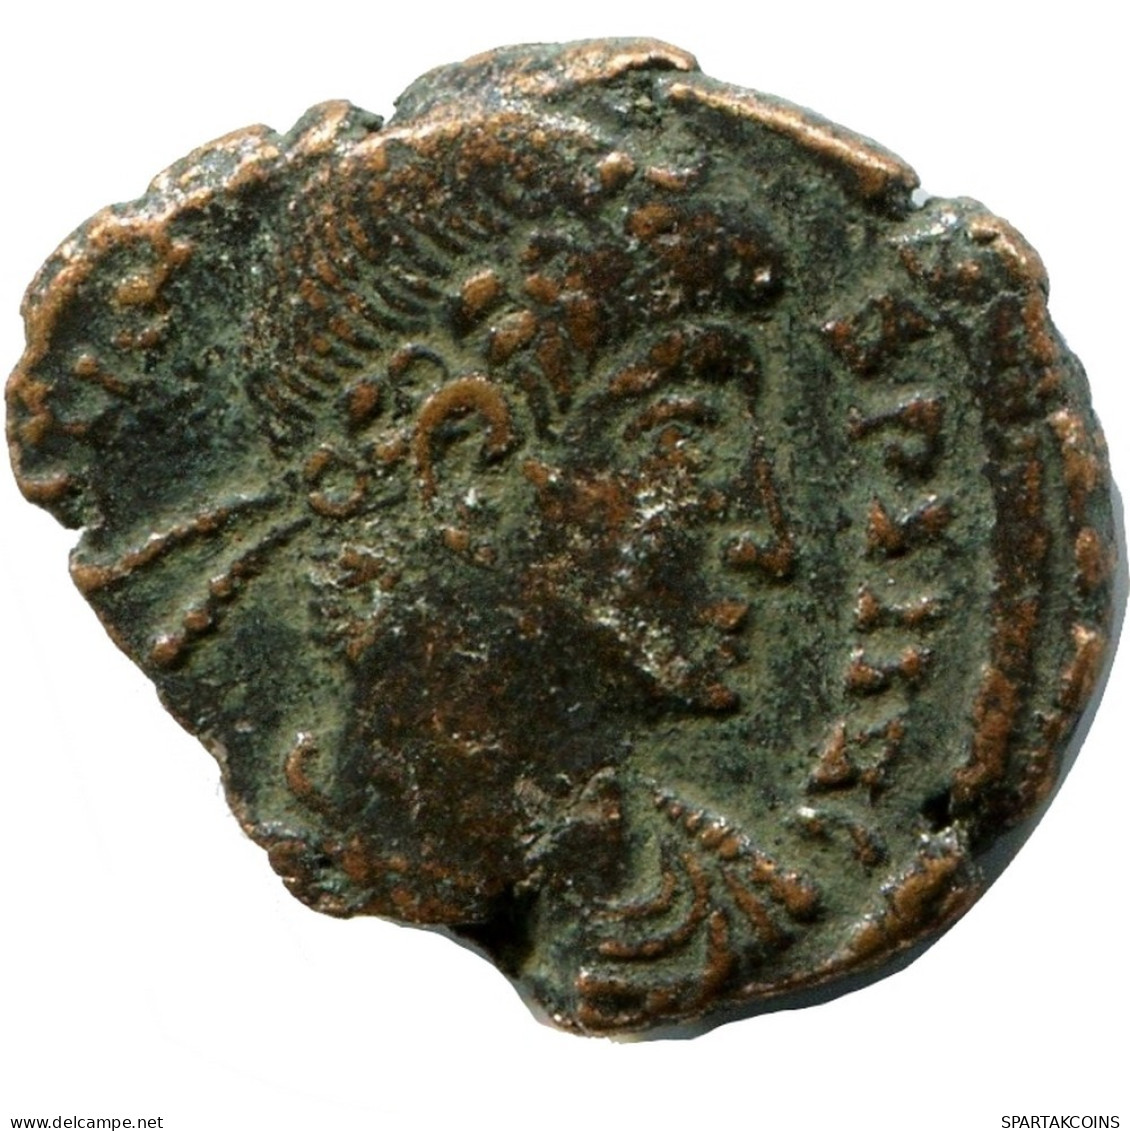 CONSTANS MINTED IN ROME ITALY FOUND IN IHNASYAH HOARD EGYPT #ANC11495.14.D.A - El Imperio Christiano (307 / 363)